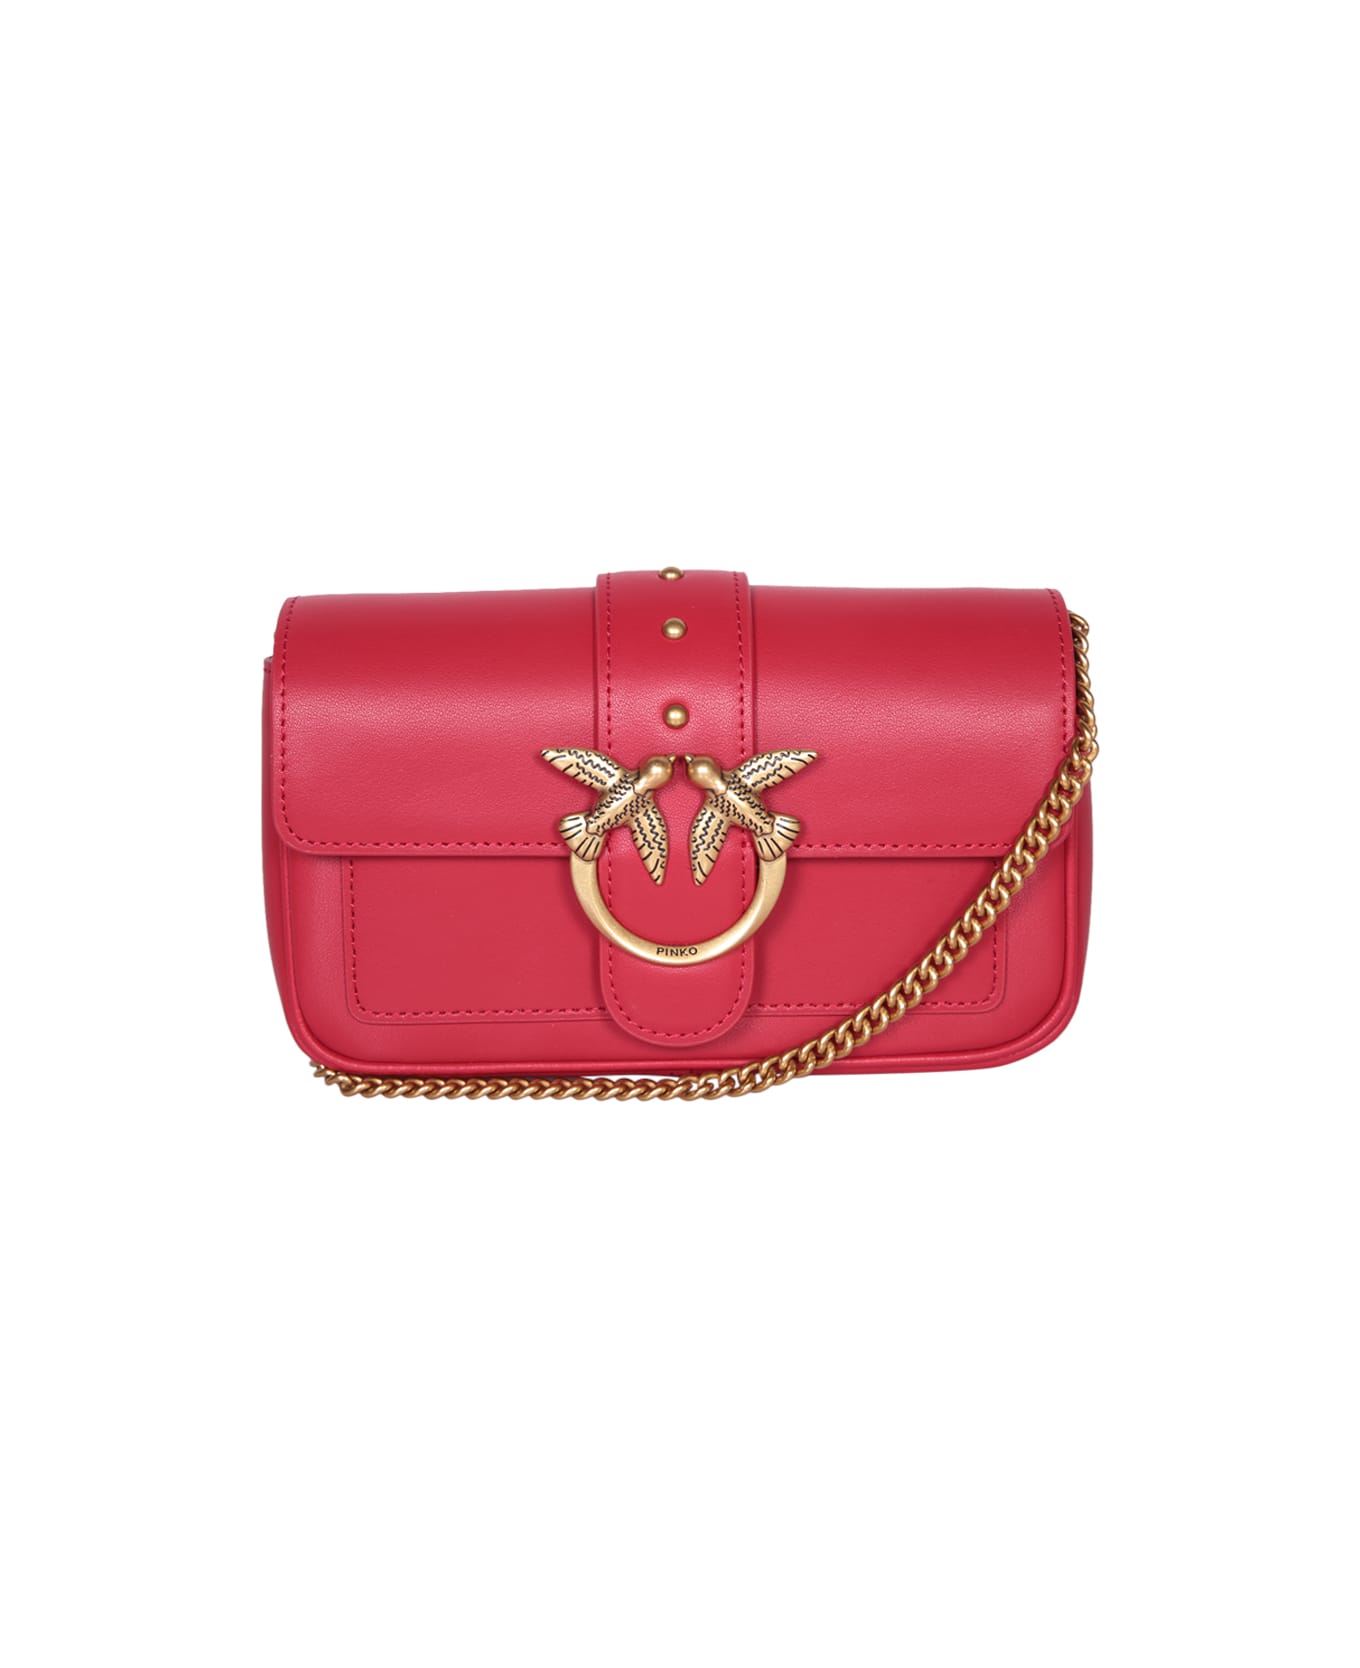 Pinko Love One Pocket Red Bag - Red